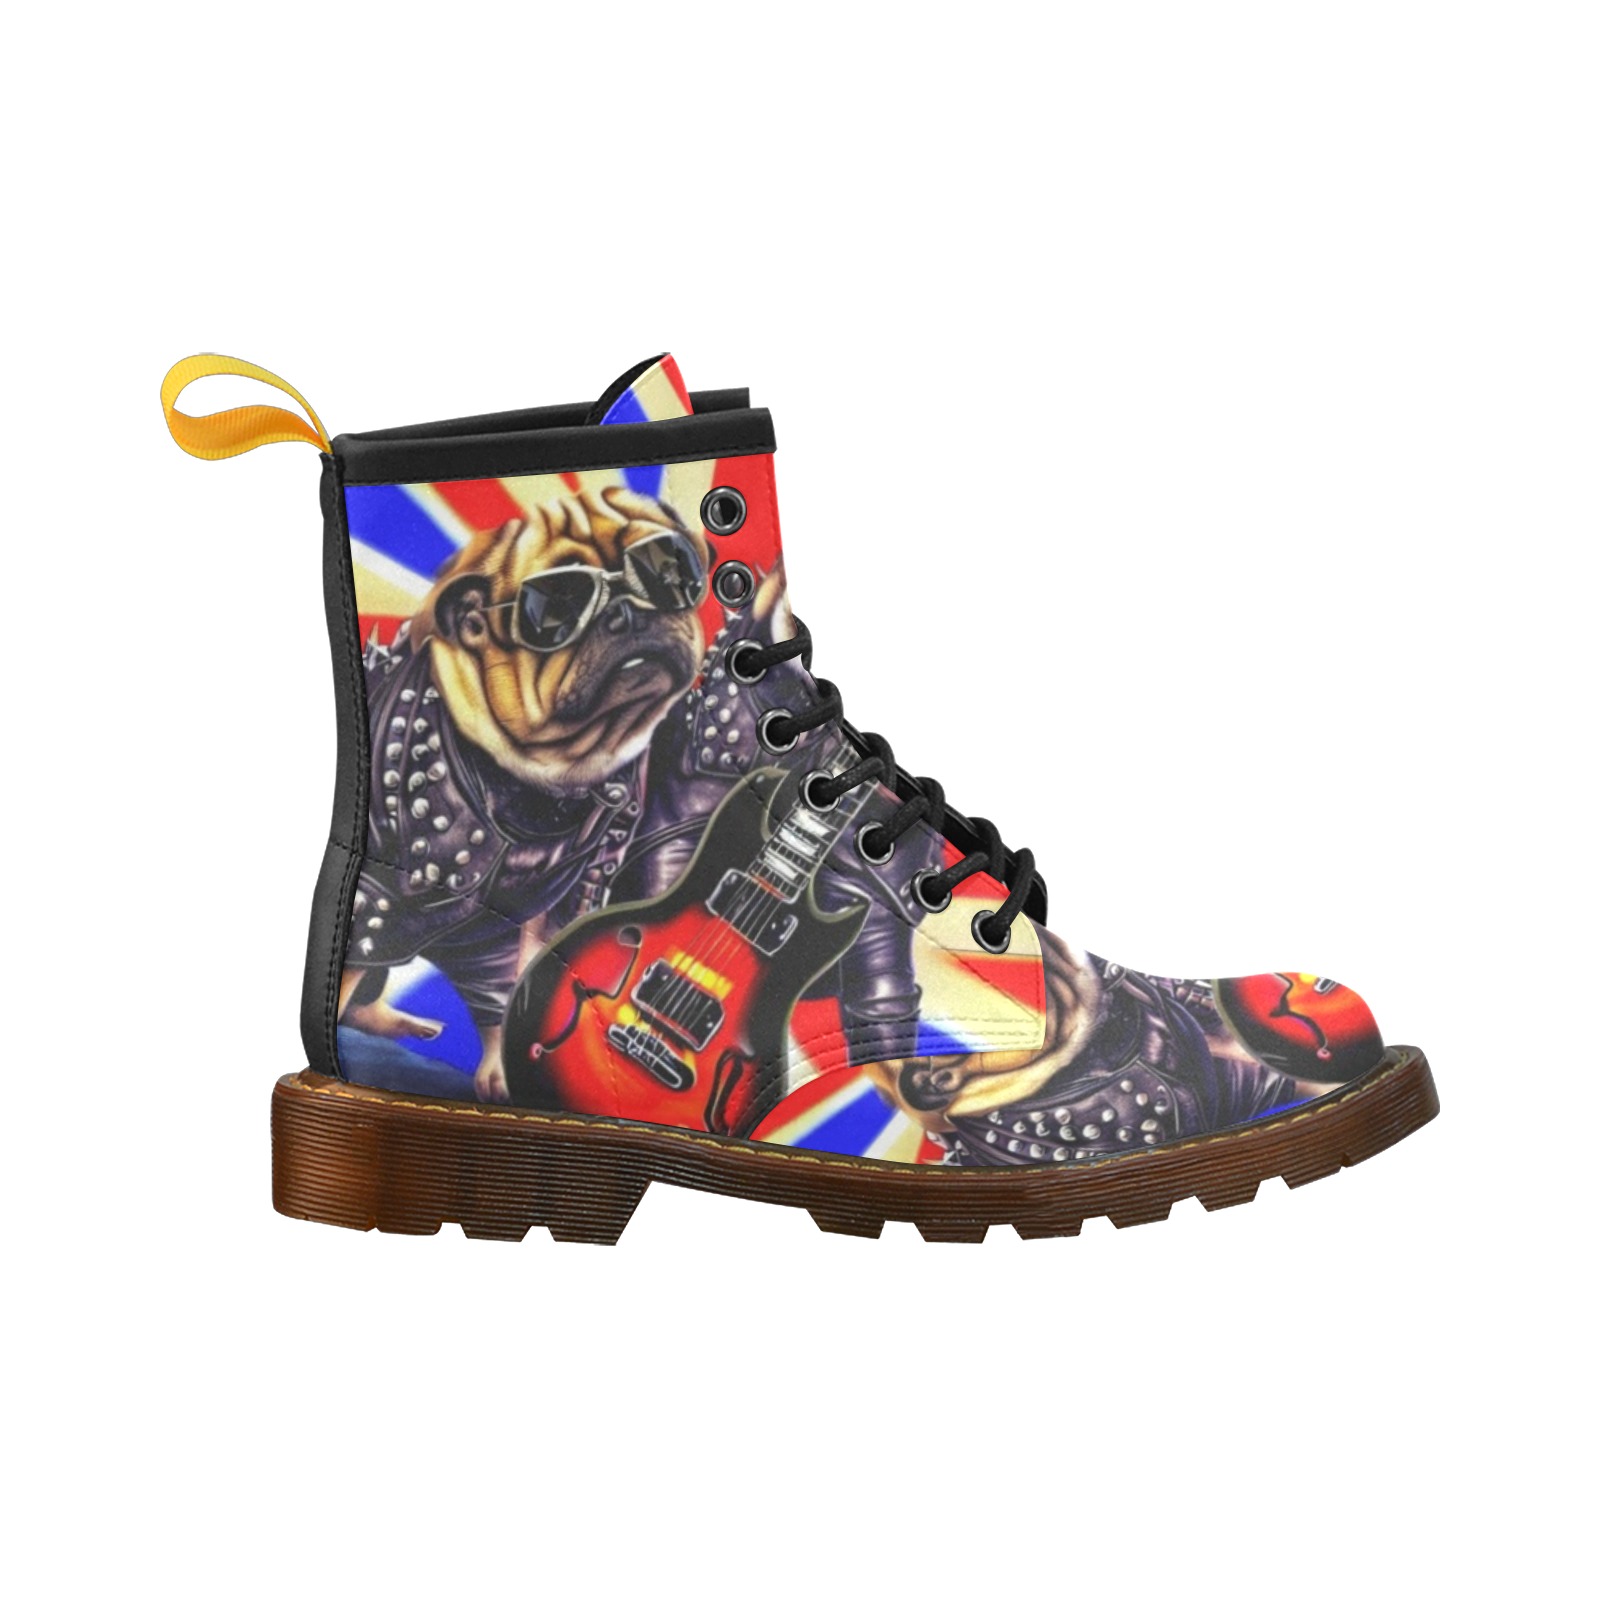 HEAVY ROCK PUG 3 High Grade PU Leather Martin Boots For Men Model 402H